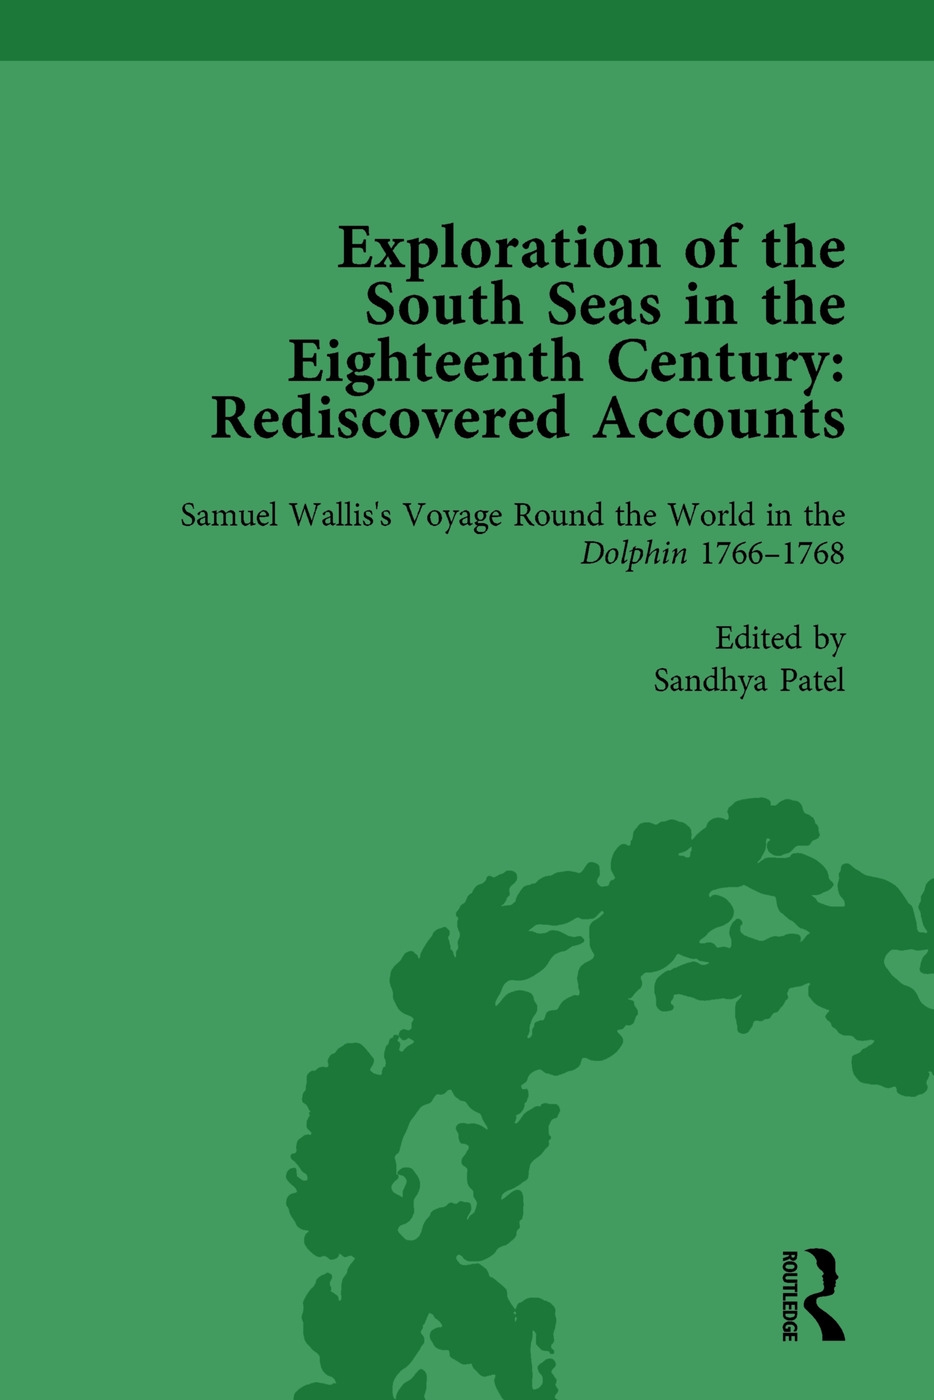 Exploration of the South Seas in the Eighteenth Century: Rediscovered Accounts, Volume I: Samuel Wallis’s Voyage Round the World in the Dolphin 1766-1